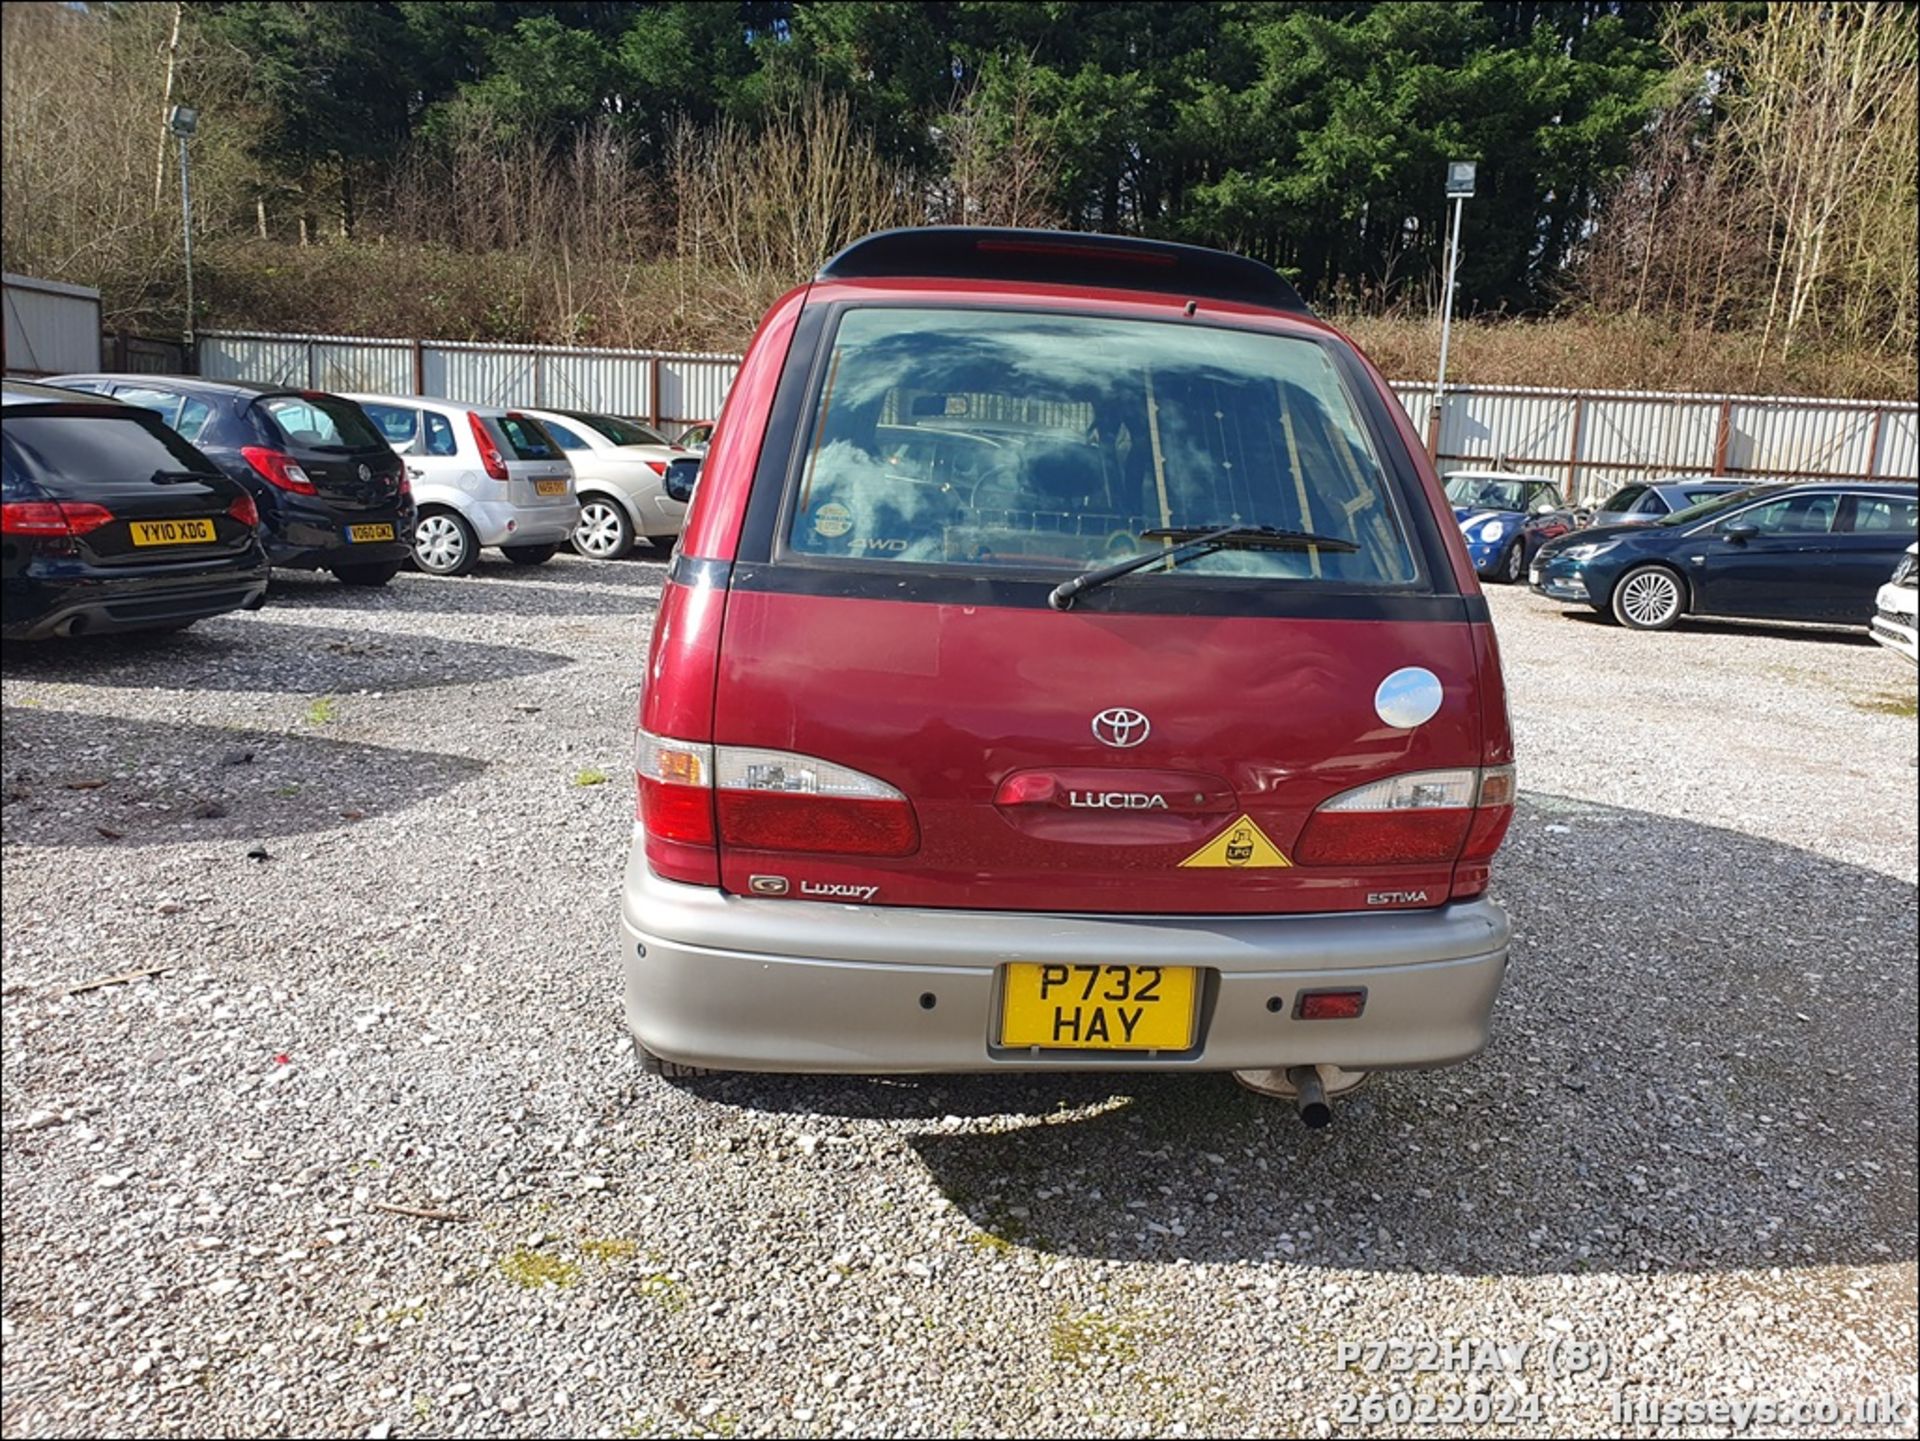 1997 TOYOTA LUCIDA - 2184cc 4dr Van (Red) - Image 9 of 22